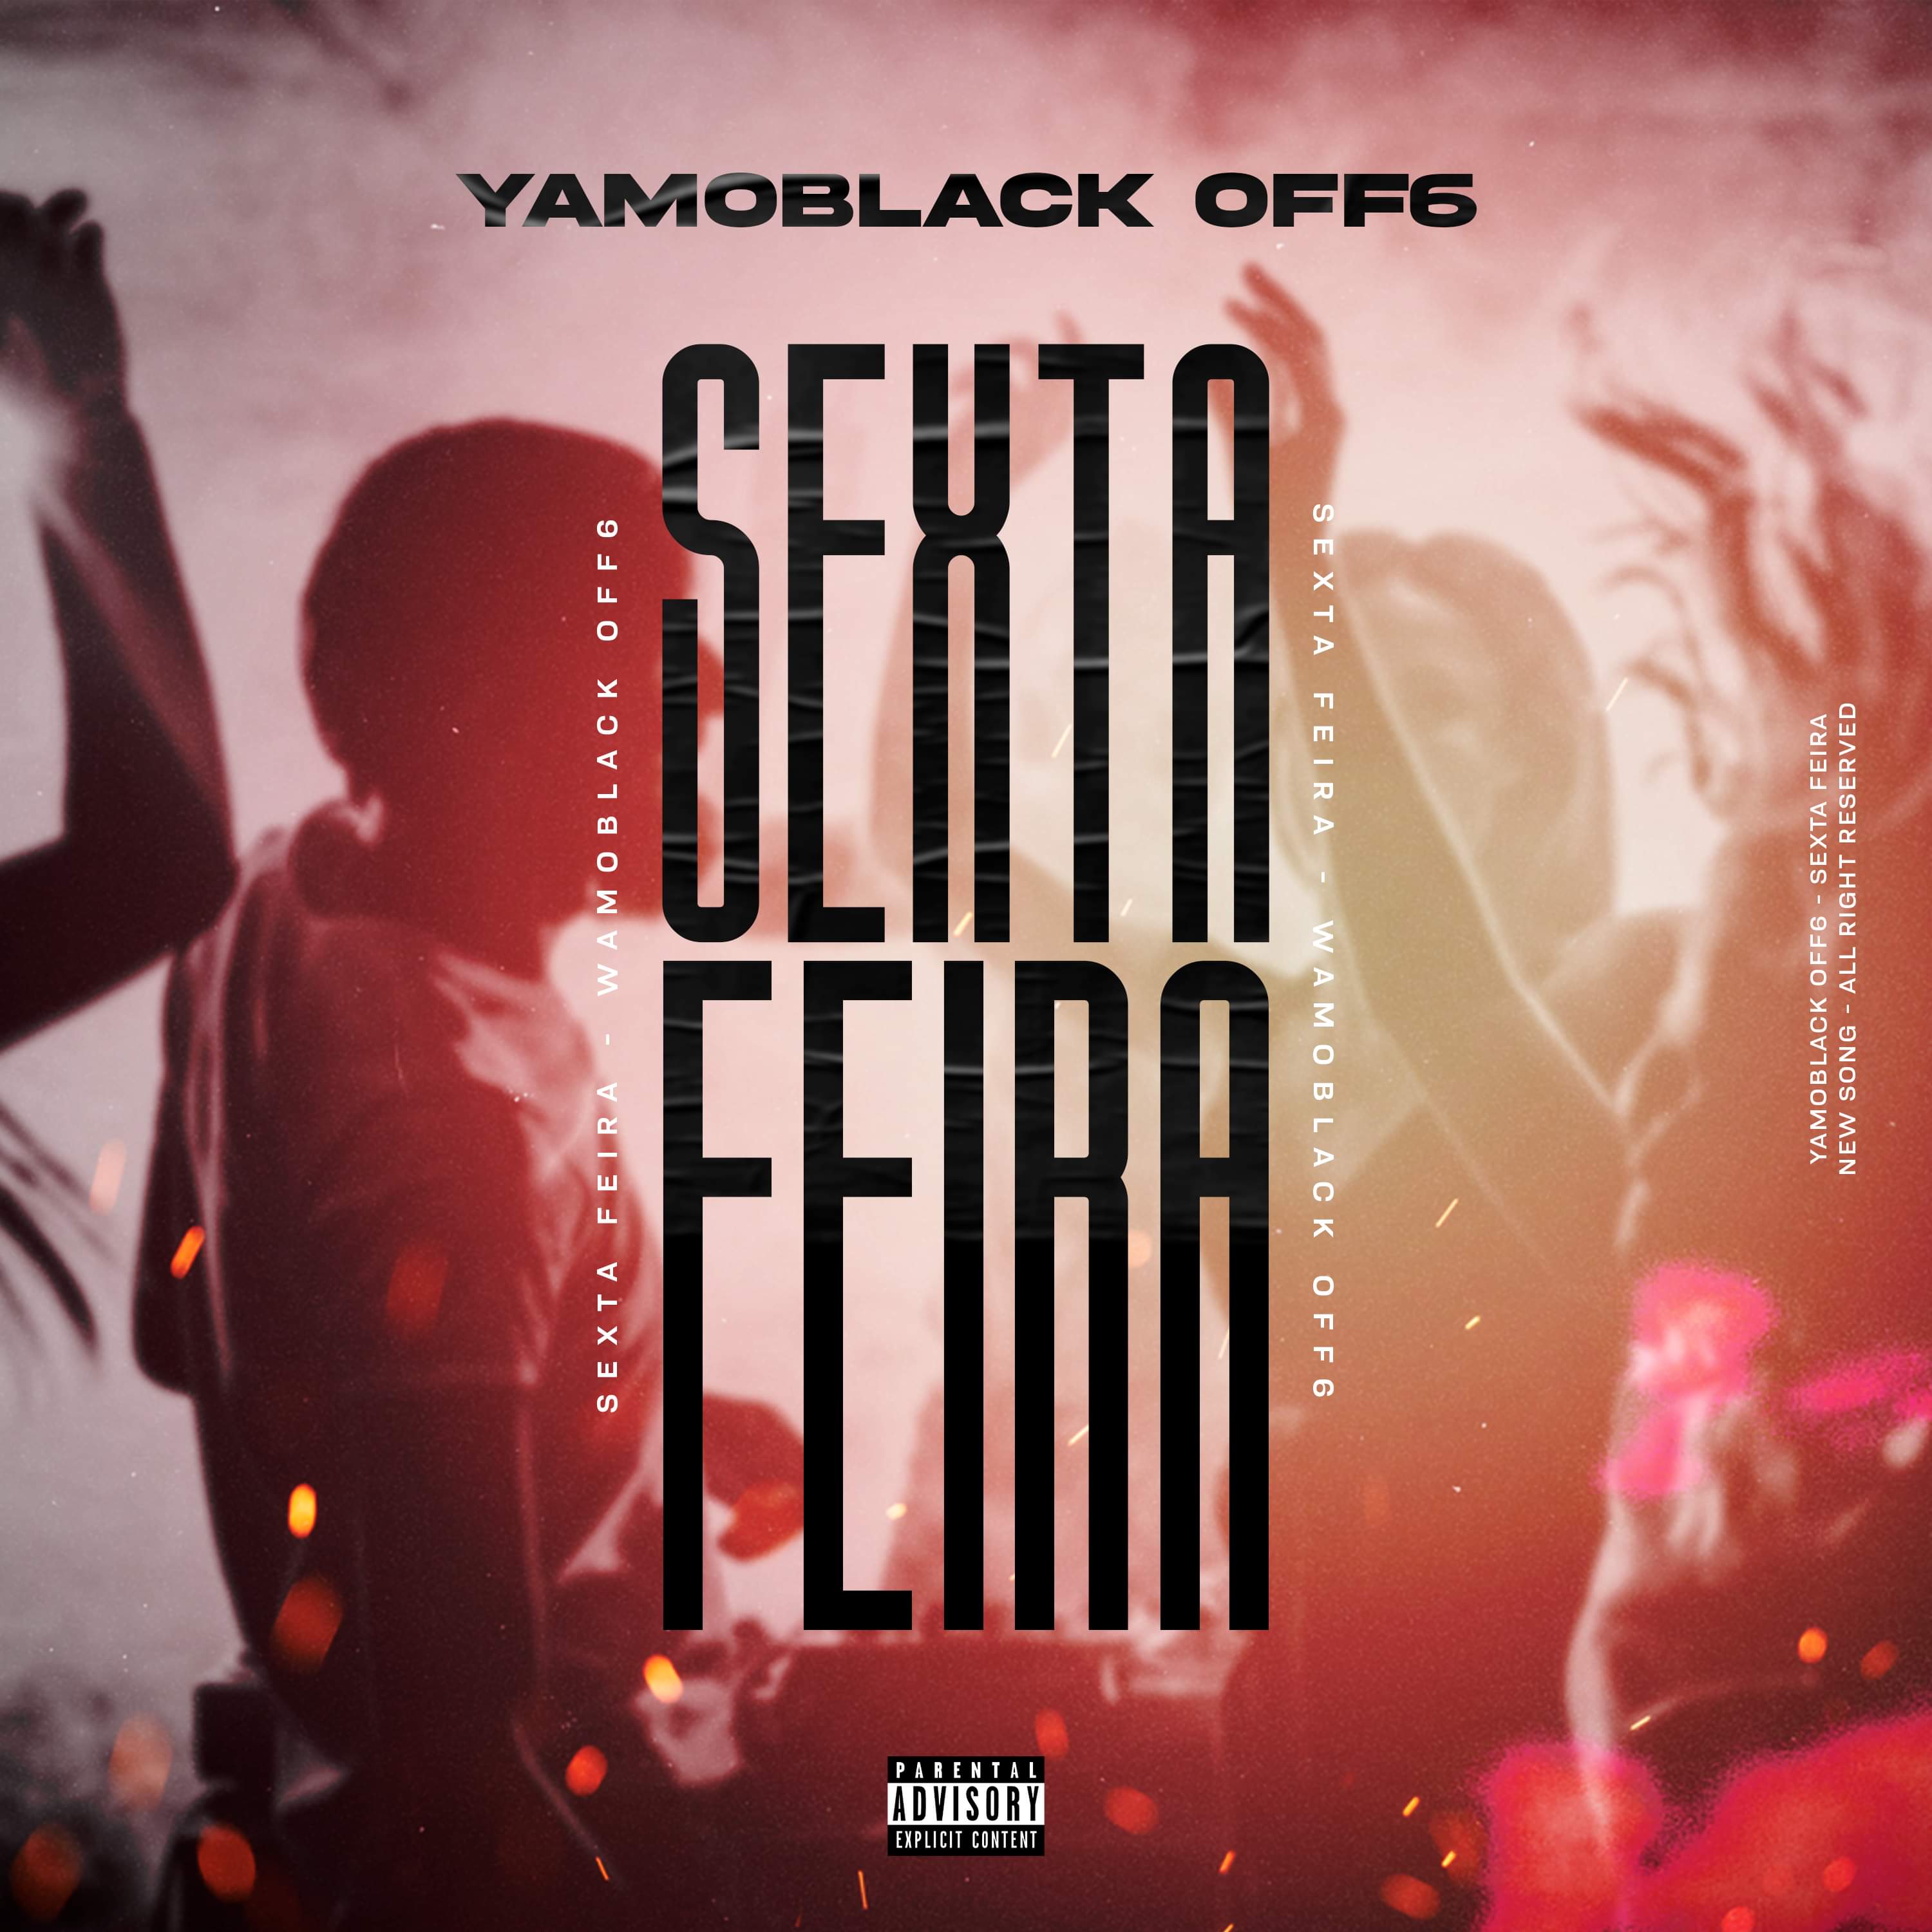 Yamoblack Off6 - Sexta Feira Download